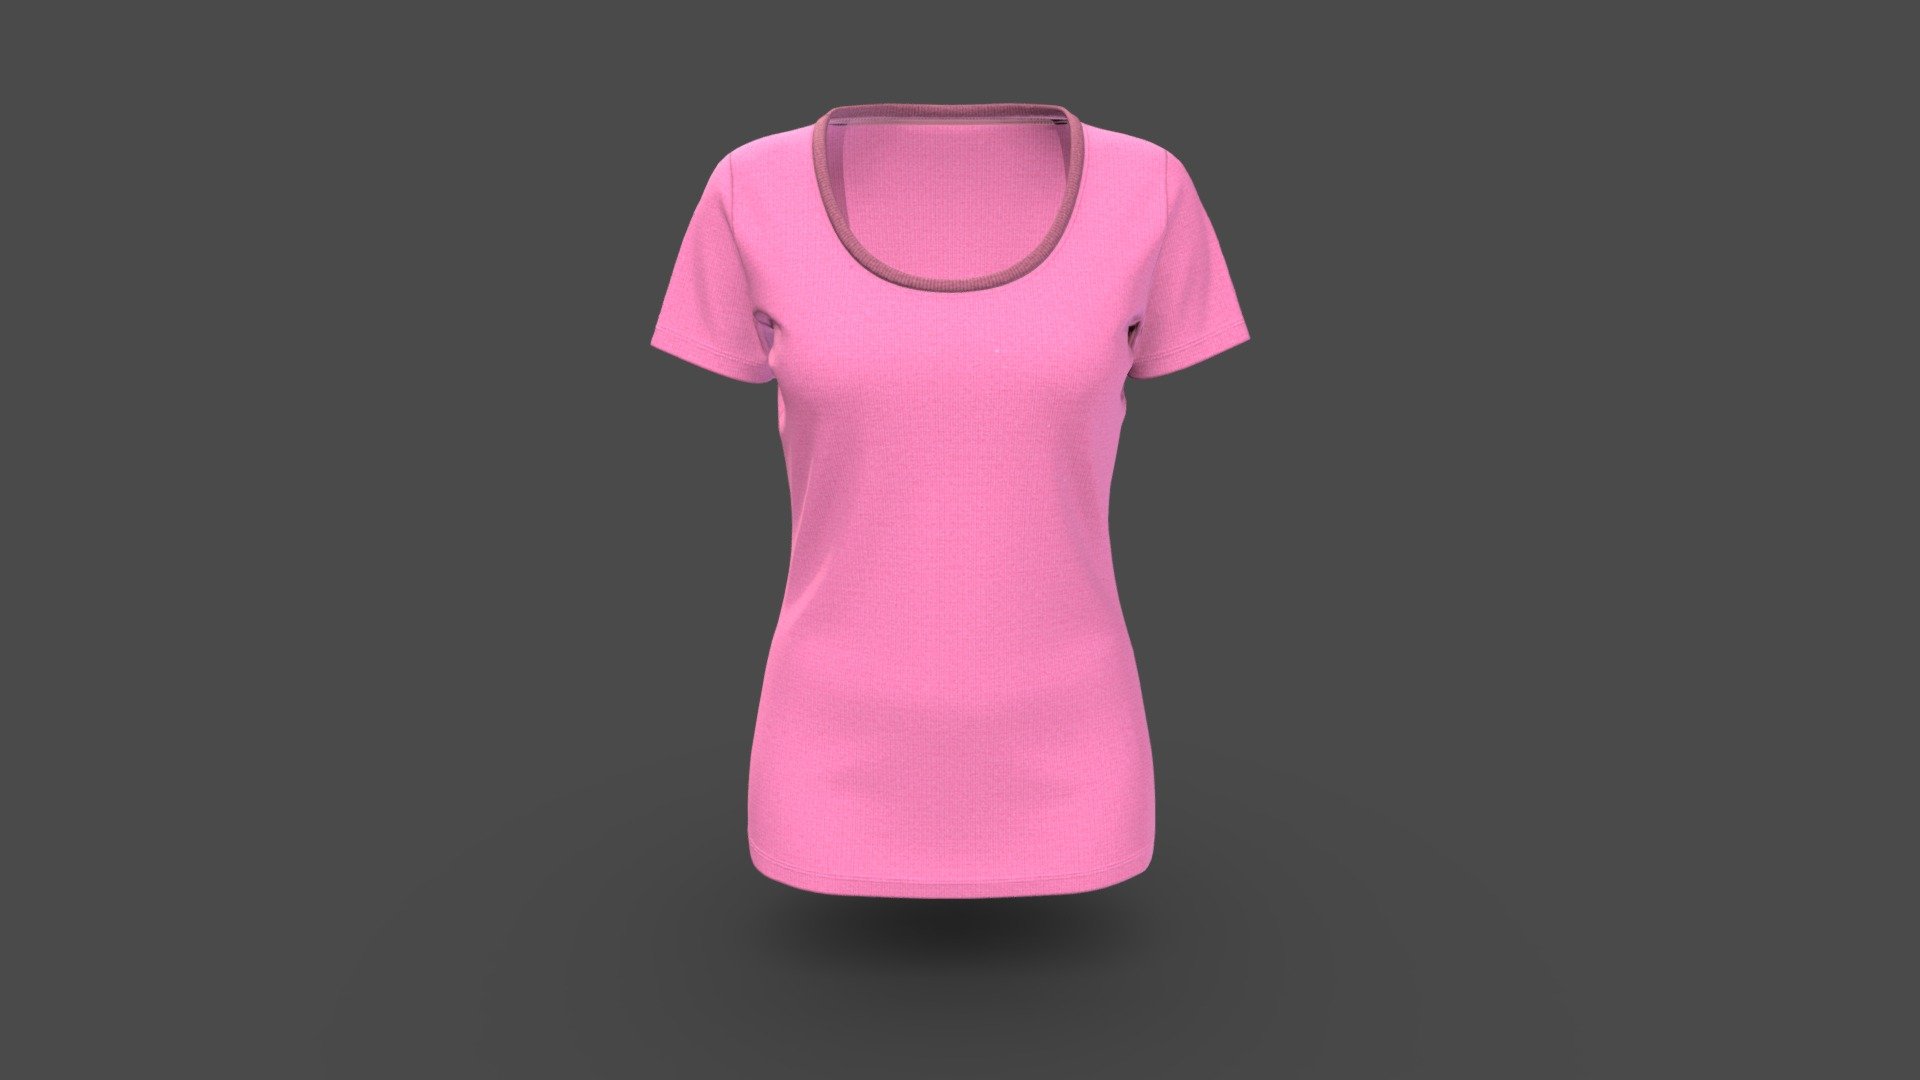 Women Classic Fashion Top
Version V1.0

Realistic high detailed Women T-shirt with high resolution textures. Model created by our unique processing &amp; Optimized for Web and AR / VR. 

Features

Optimized &amp; NON-Optimized obj model with 4K texture included




Optimized for AR/VR/MR

4K &amp; 2K fabric texture and details

Optimized model is 940KB

NON-Optimized model is 8.44MB

Knit fabric texture and print details included

GLB file in 2k texture size is 5.03MB

GLB file in 4k texture size is 23.6MB (Game &amp; Animation Ready)

Suitable for web application configurator development.

Fully unwrap UV

The model has 1 material

Includes high detailed normal map

Unit measurement was inch

Triangular Mesh with 8.4k Vertices

Texture map: Base color, OcclusionRoughnessMetallic(ORM), Normal

Tpose  available on request

For more details or custom order send email: hello@binarycloth.com


Website:binarycloth.com - Women Classic Fashion Top - Buy Royalty Free 3D model by BINARYCLOTH (@binaryclothofficial) 3d model